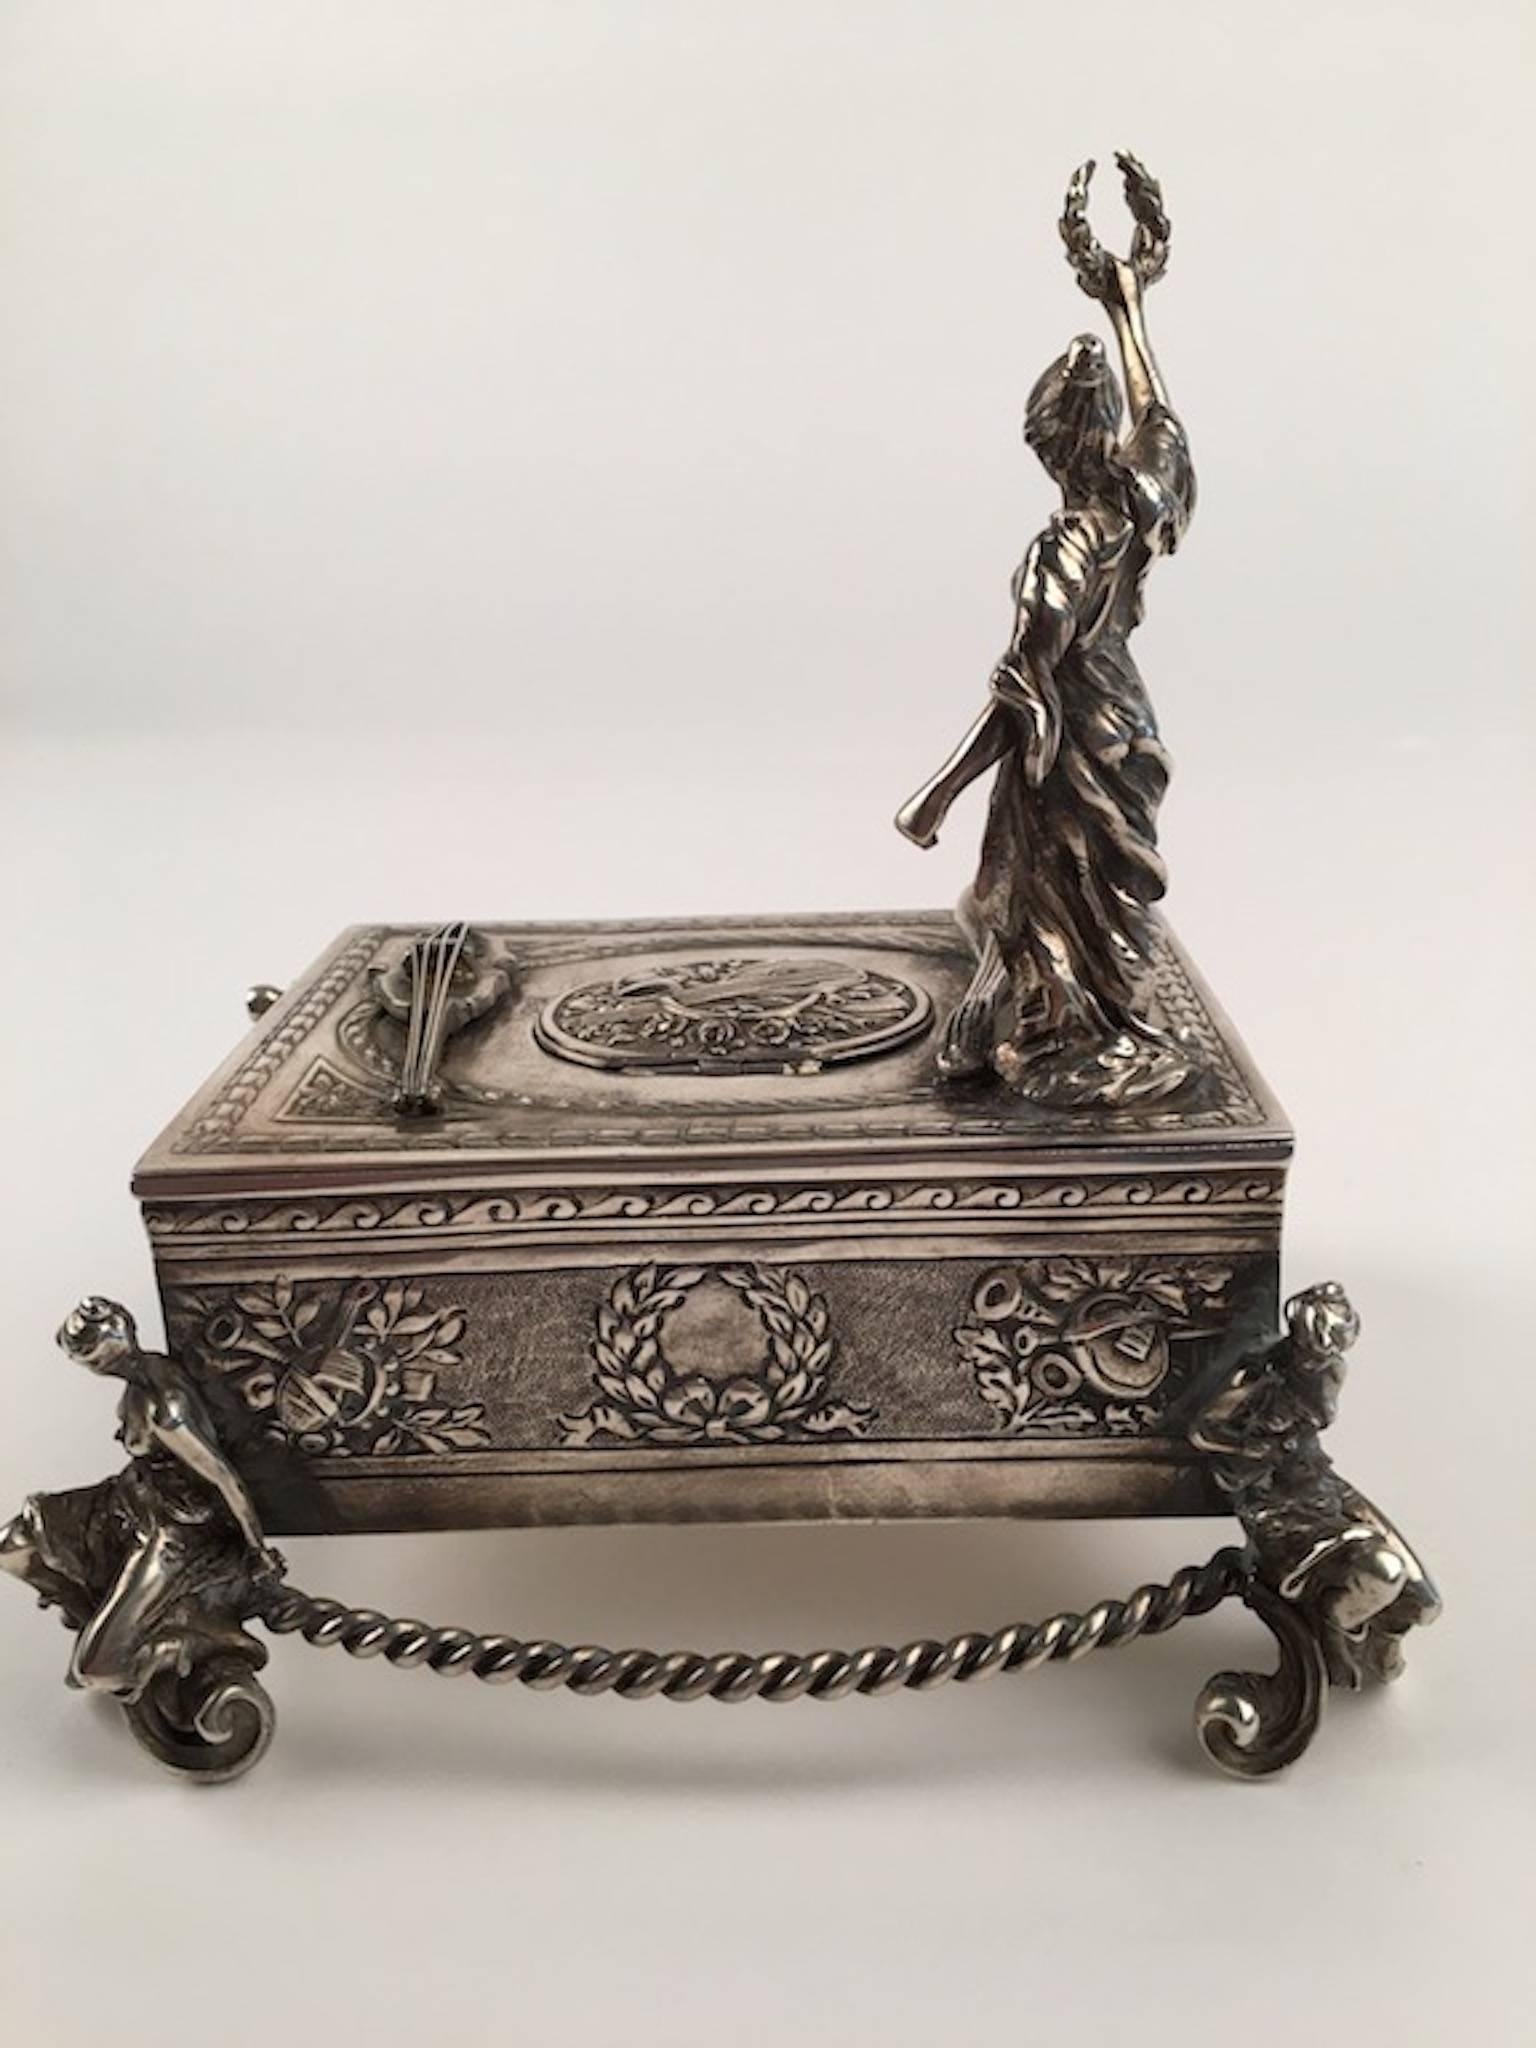 925 silver bird box with a lady holding a wreath. 
When the knob is pulled the lid lifts and a bird appears and tweets a song.